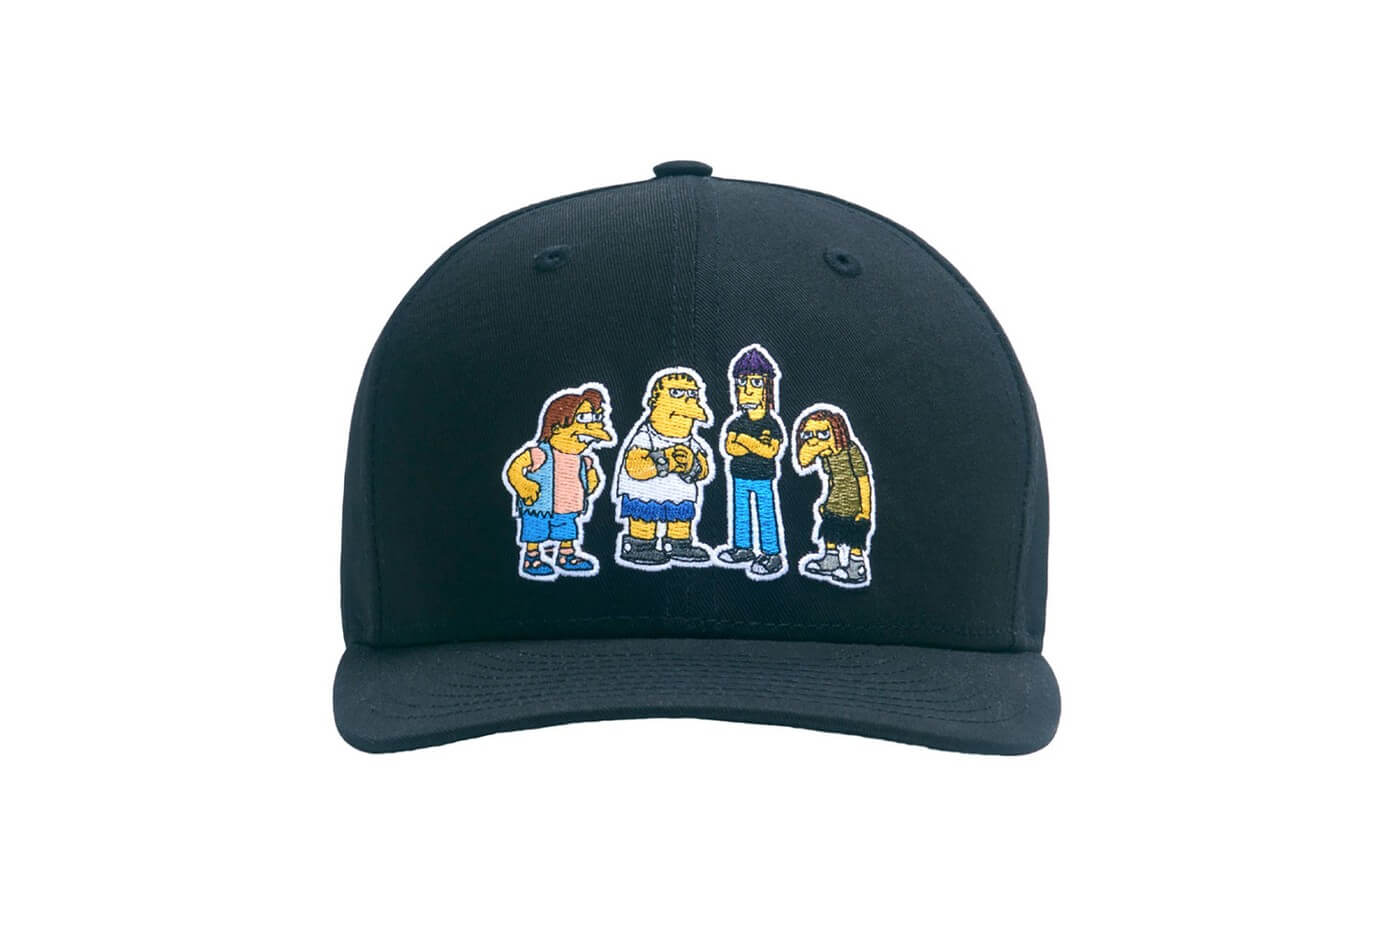 KITH x The Simpsons Collection – aGOODoutfit